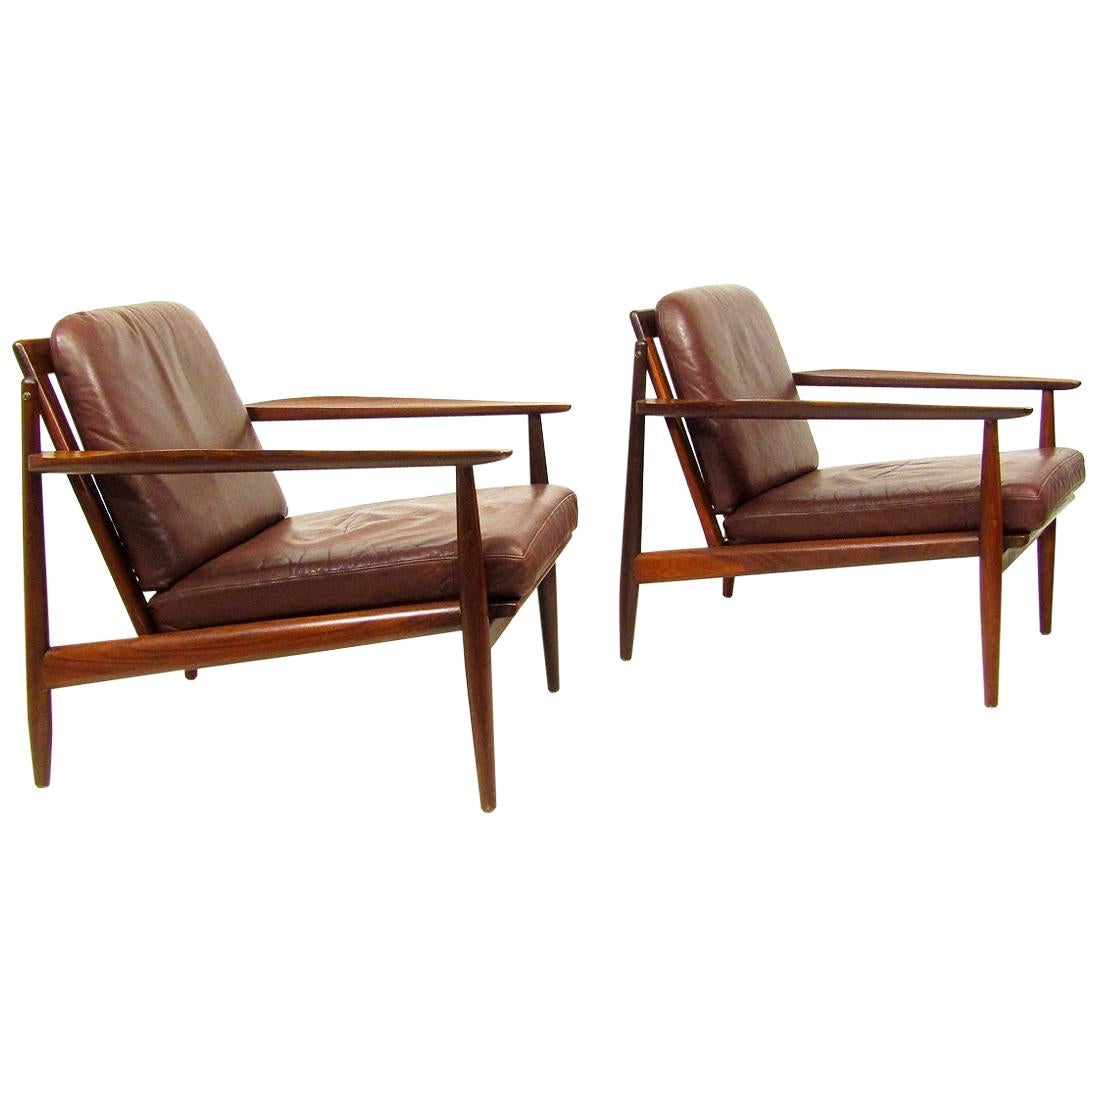 Two Danish Lounge Chairs in Mahogany and Leather by Arne Vodder